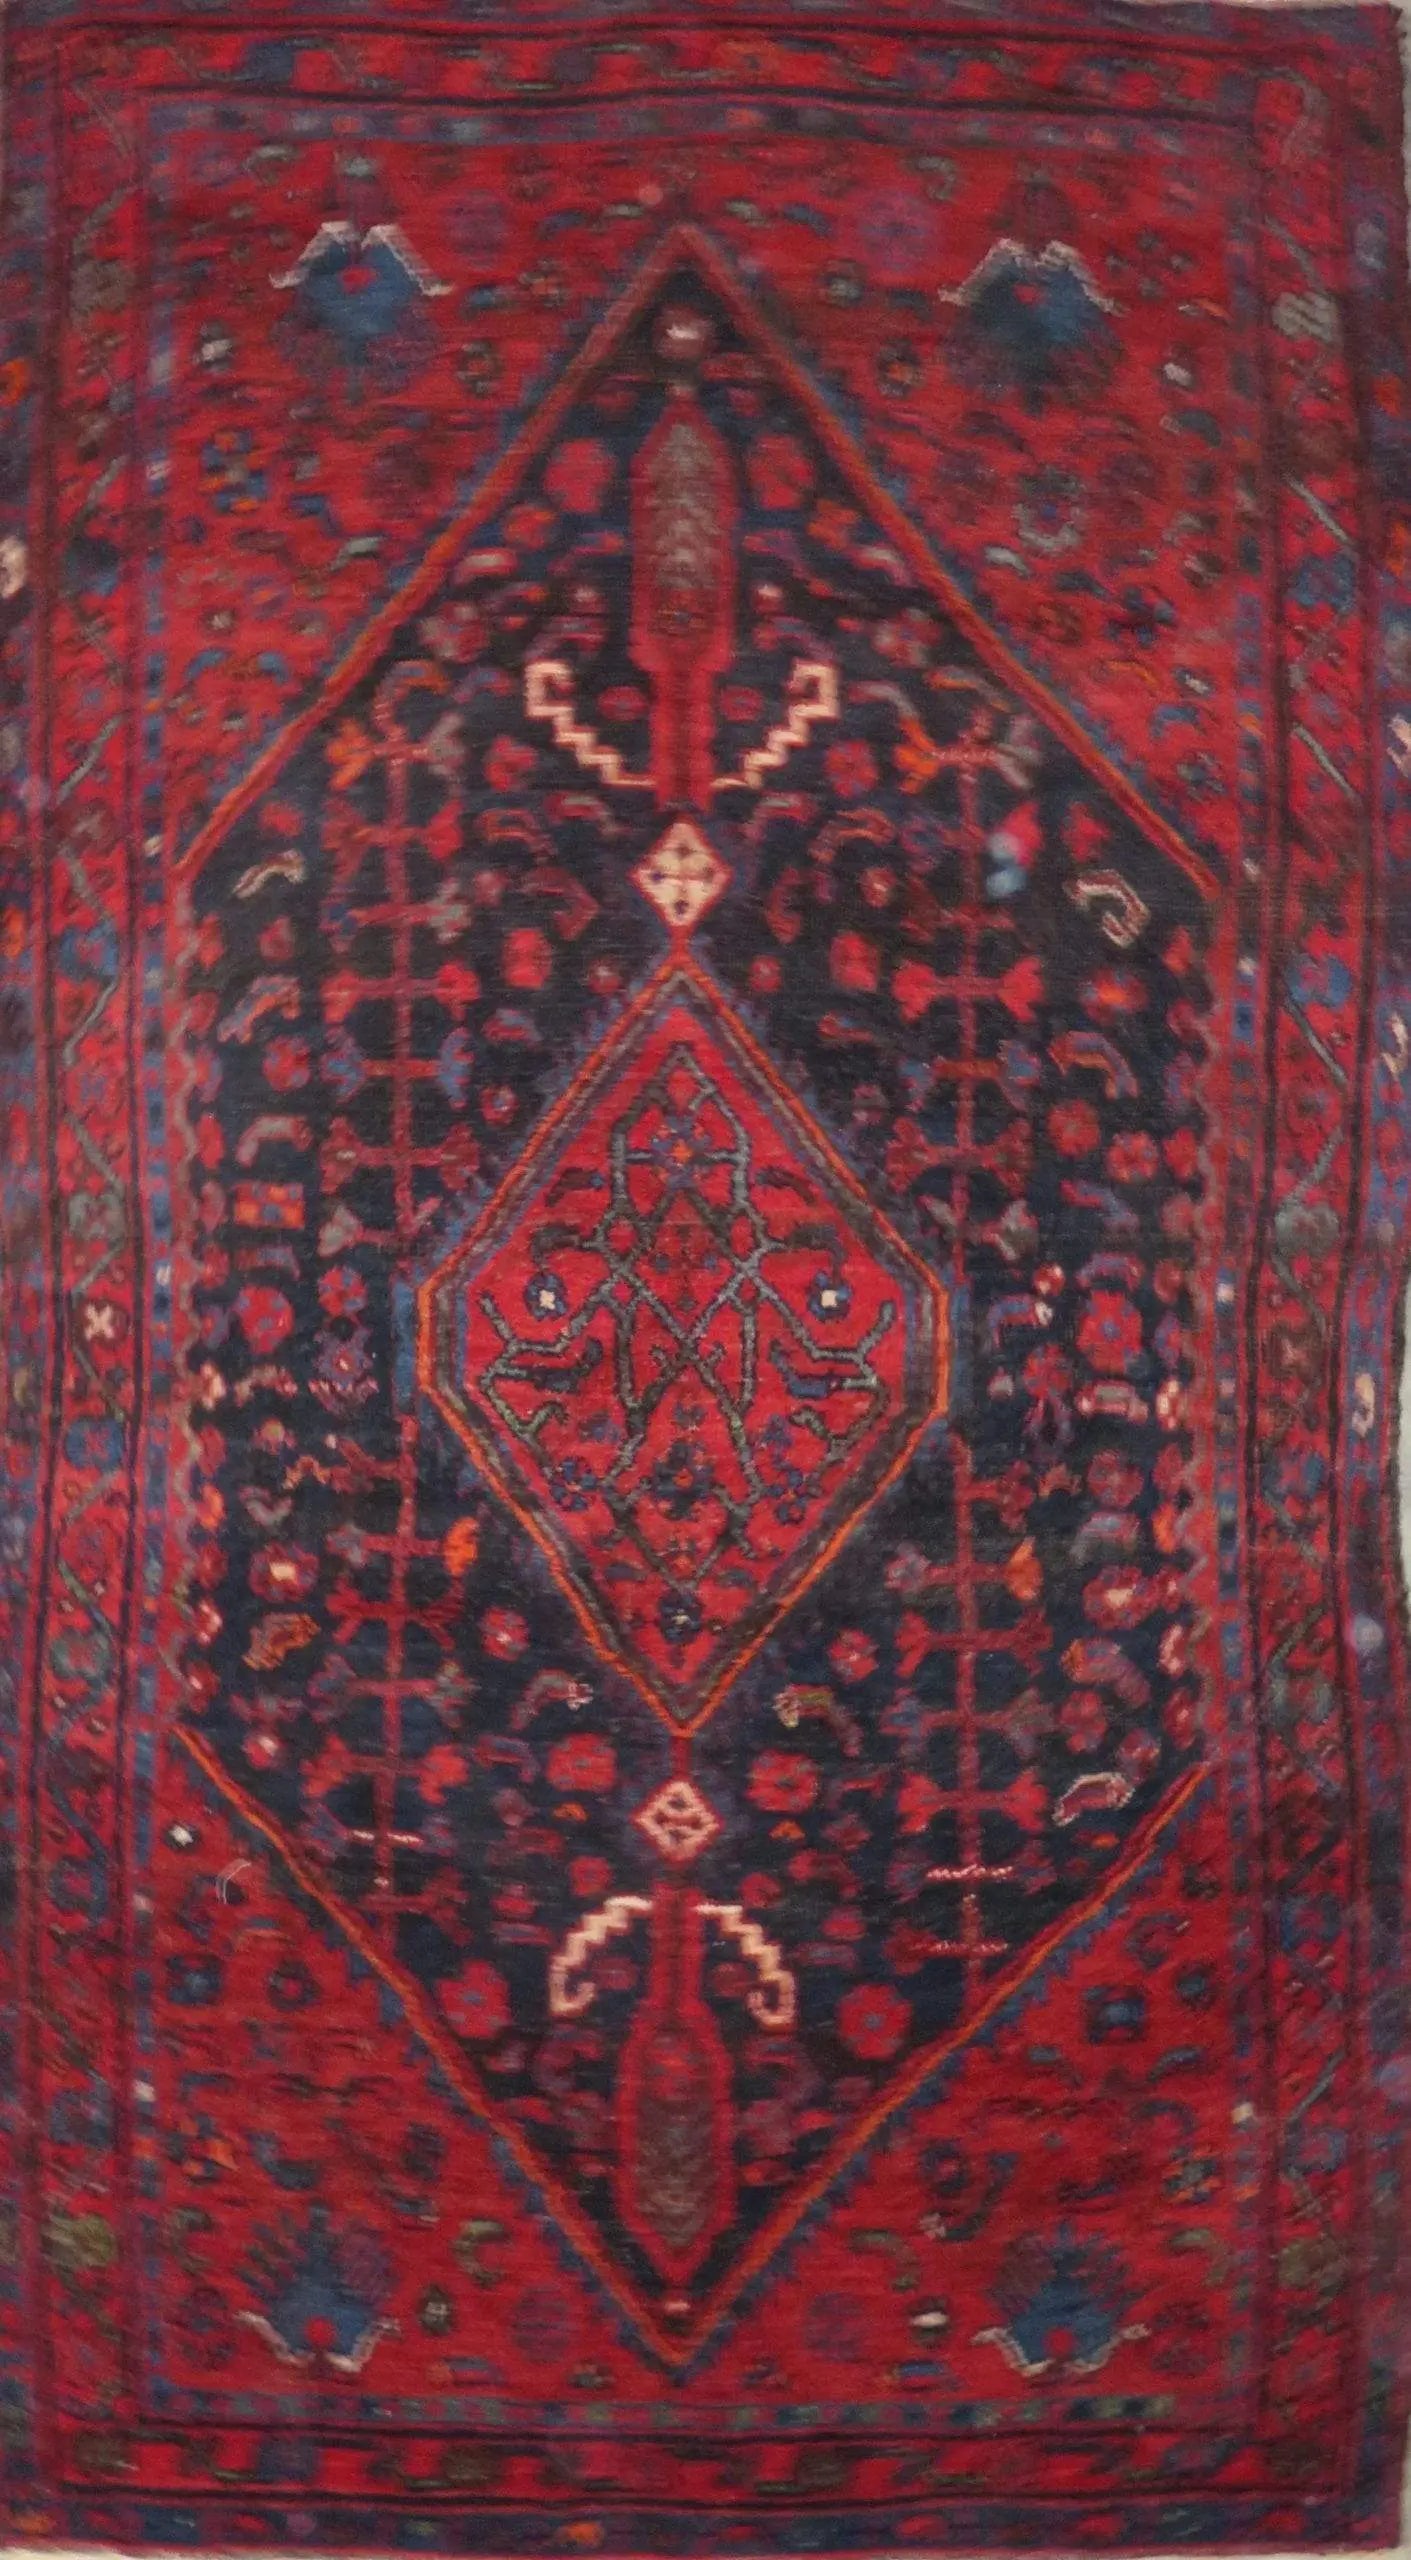 Hand-Knotted Persian Wool Rug _ Luxurious Vintage Design, 7'7" x 4'0", Artisan Crafted